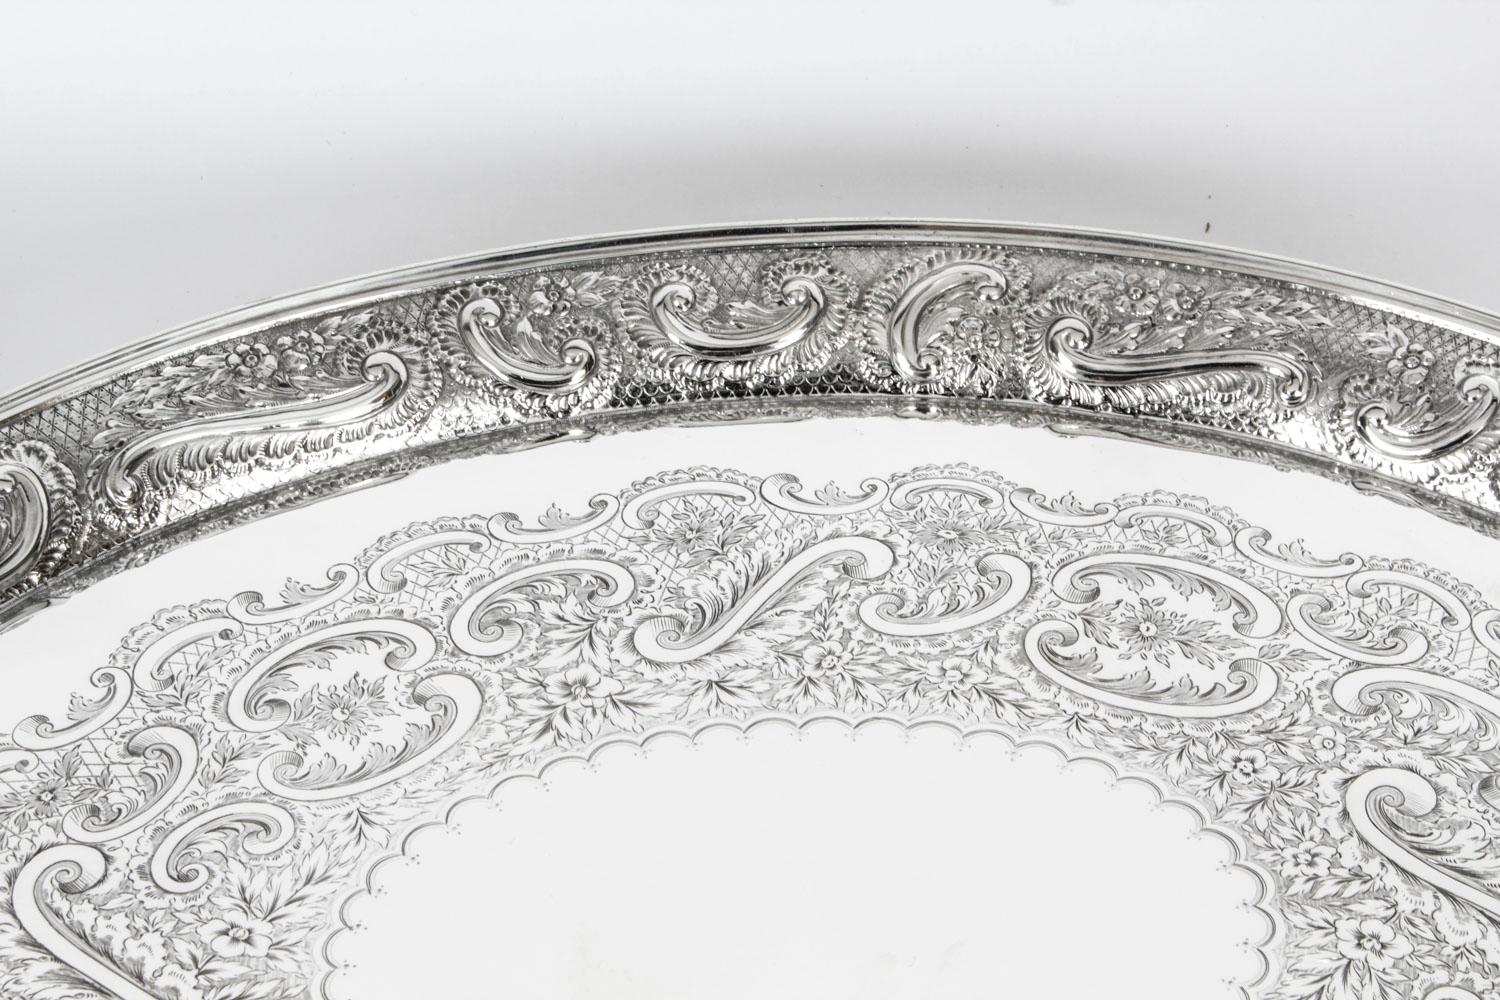 Late 19th Century Antique Oval Victorian Silver Plated Tray by Mappin & Webb, 19th Century